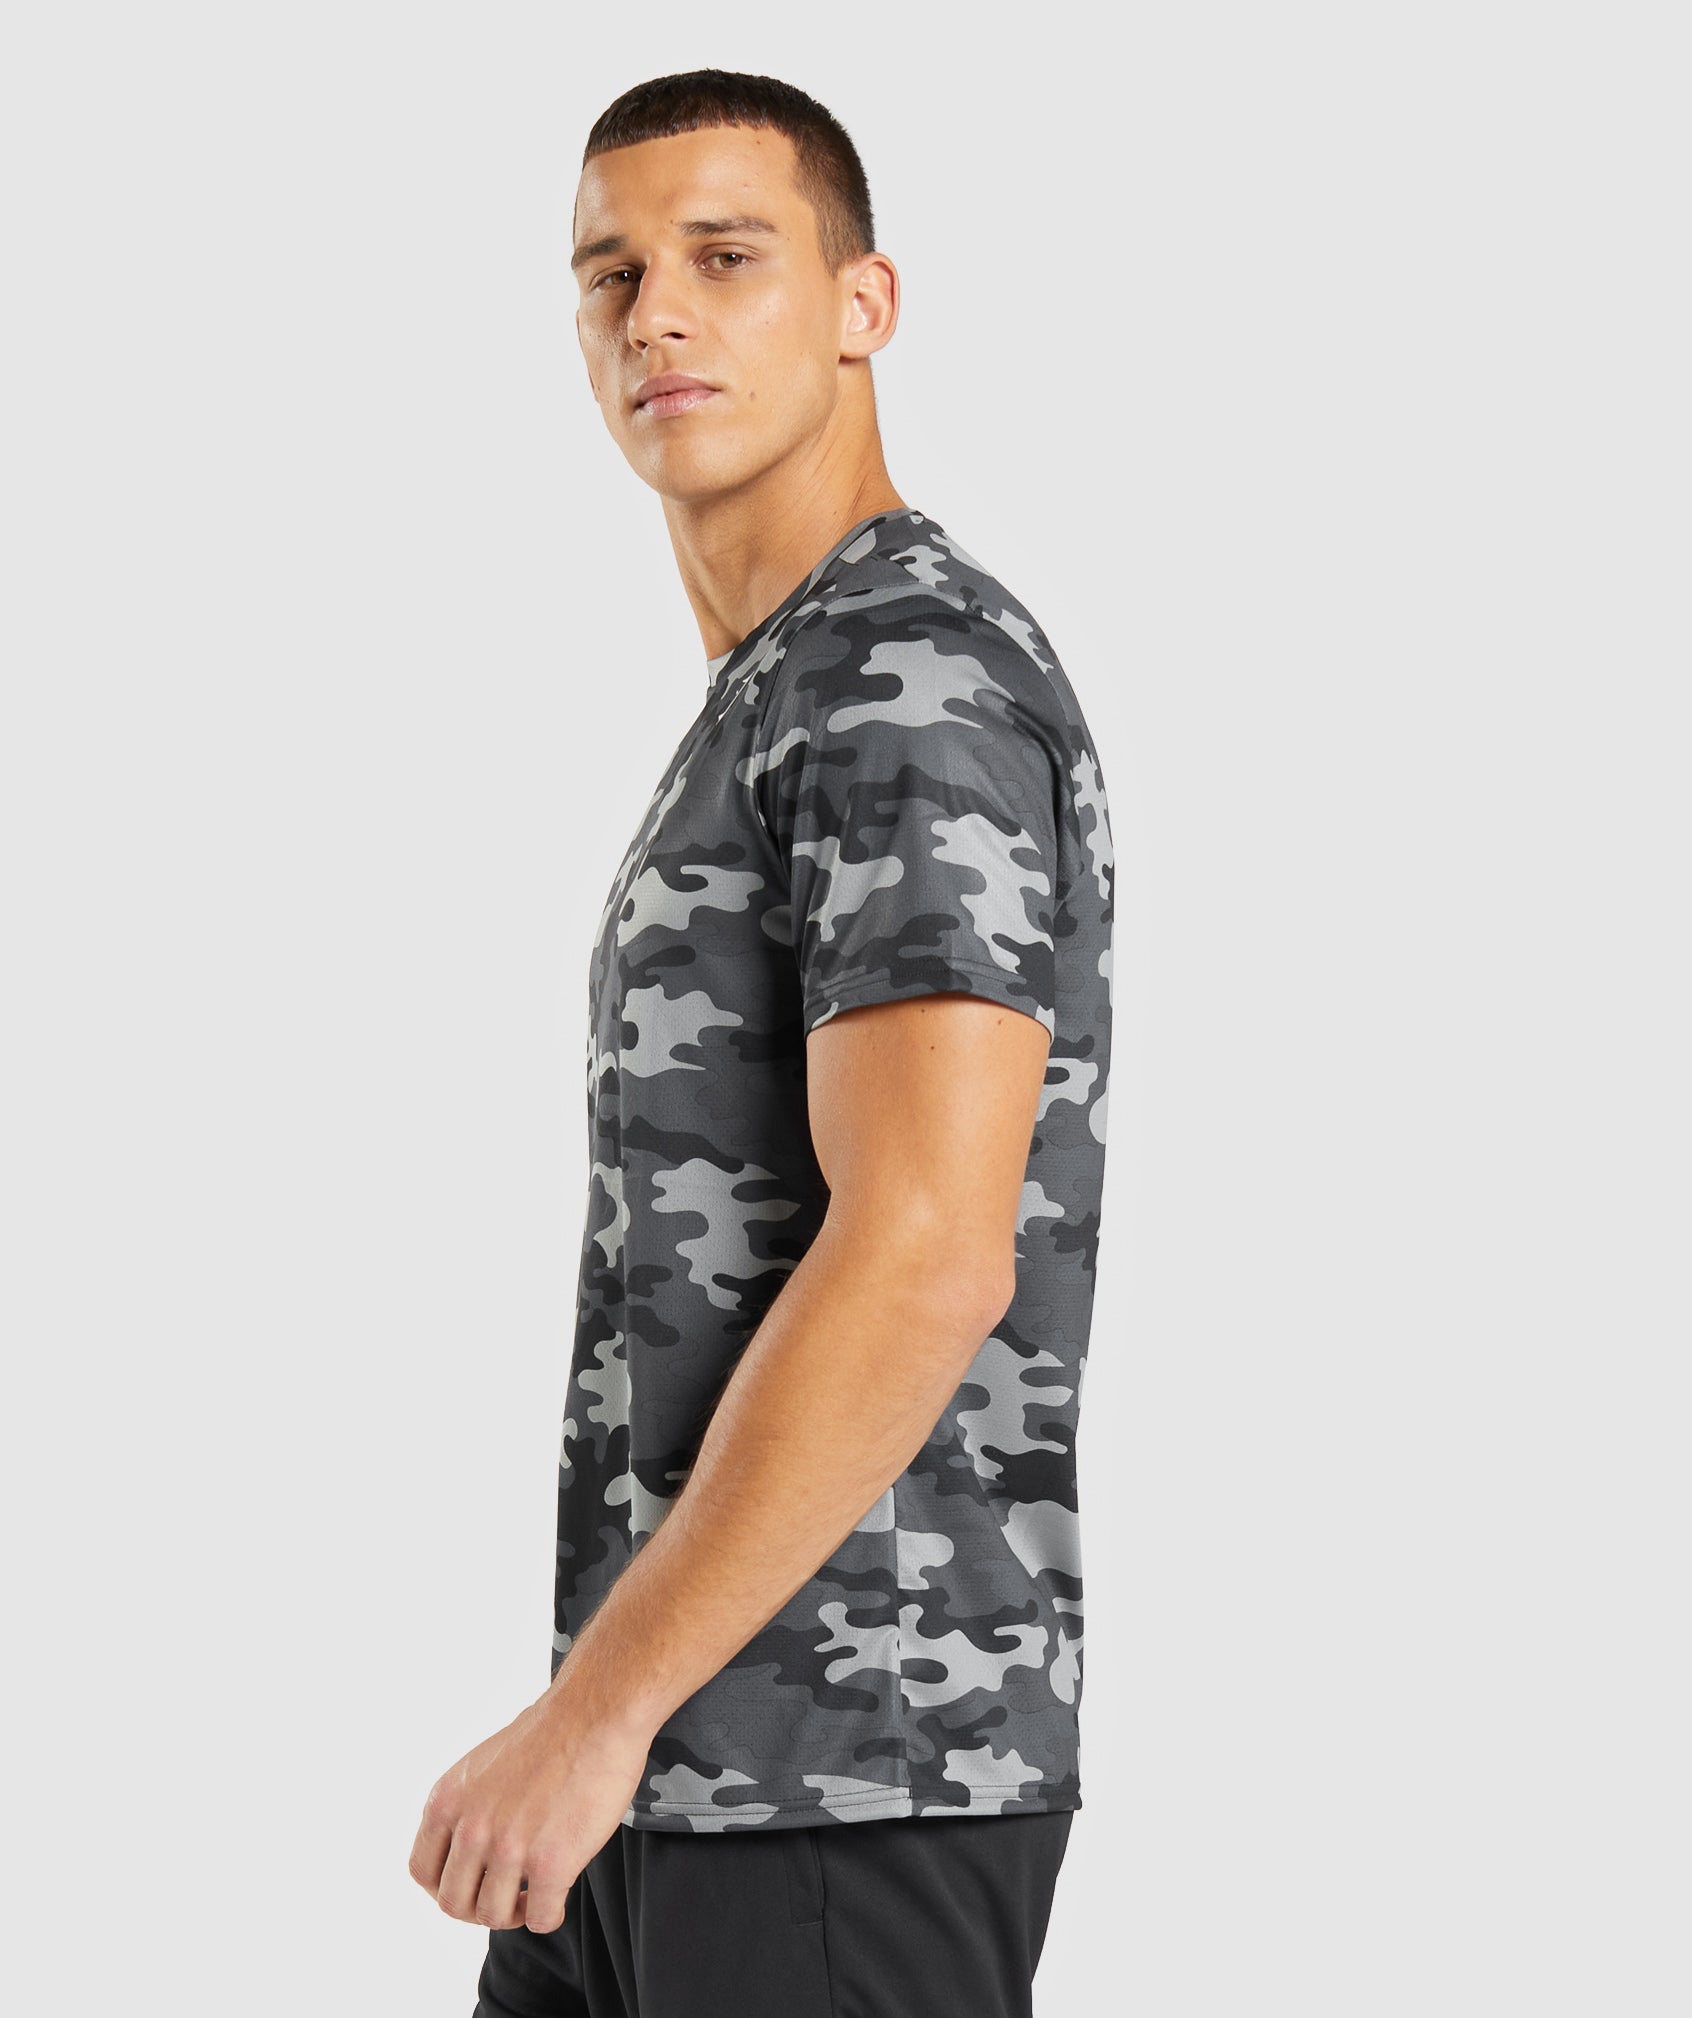 Arrival T-Shirt in Grey Print - view 4